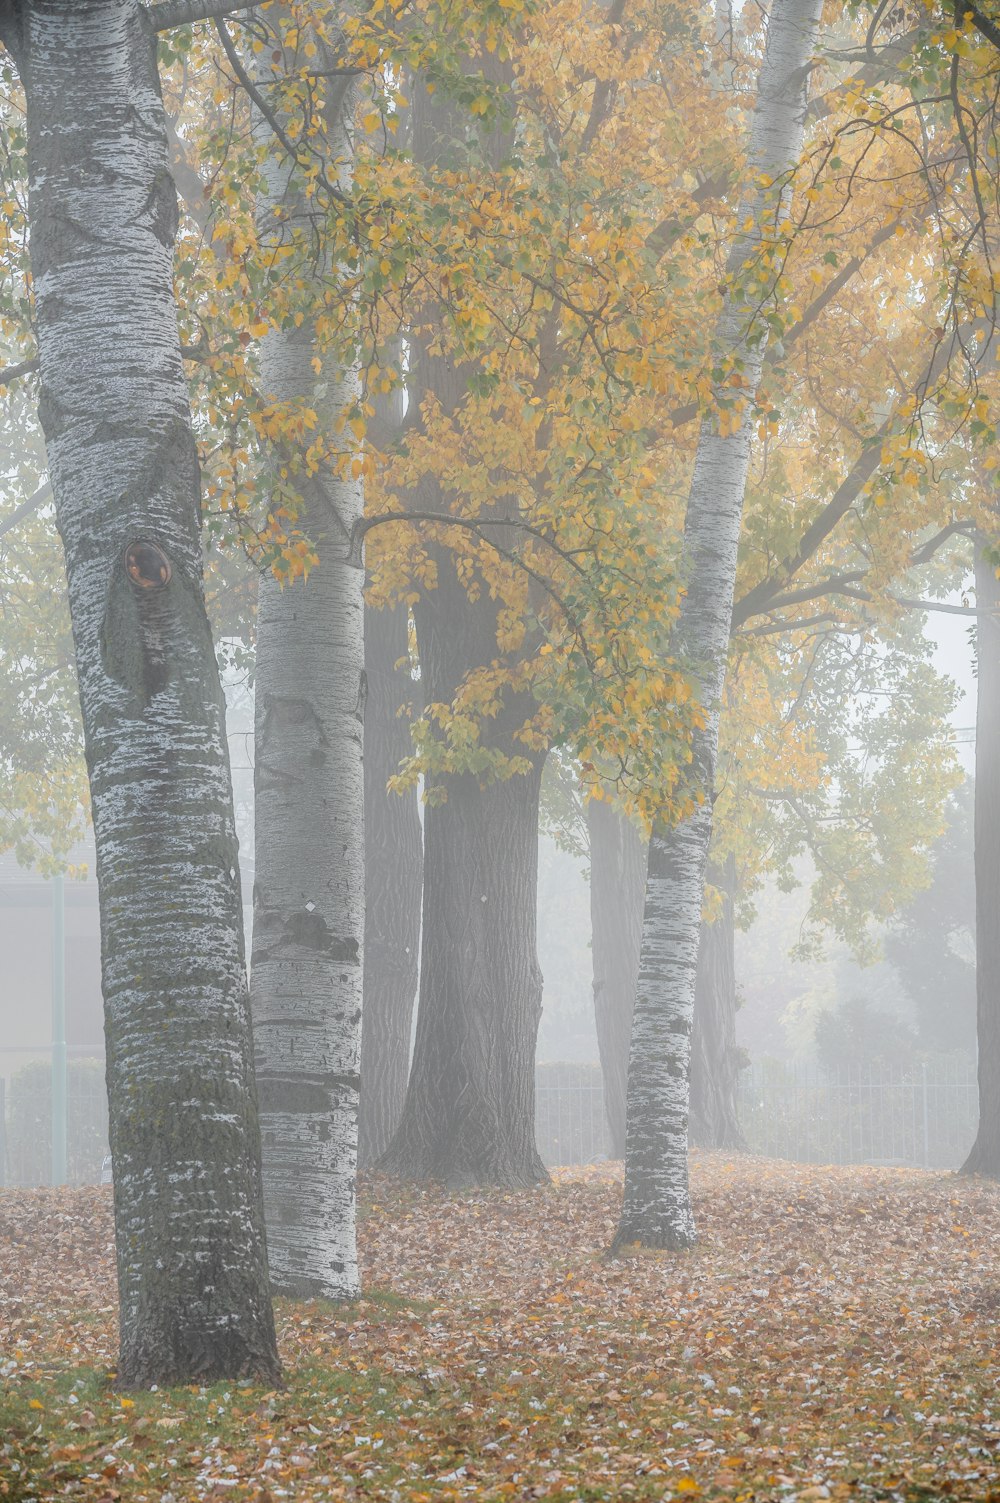 a foggy day in a park with trees and leaves